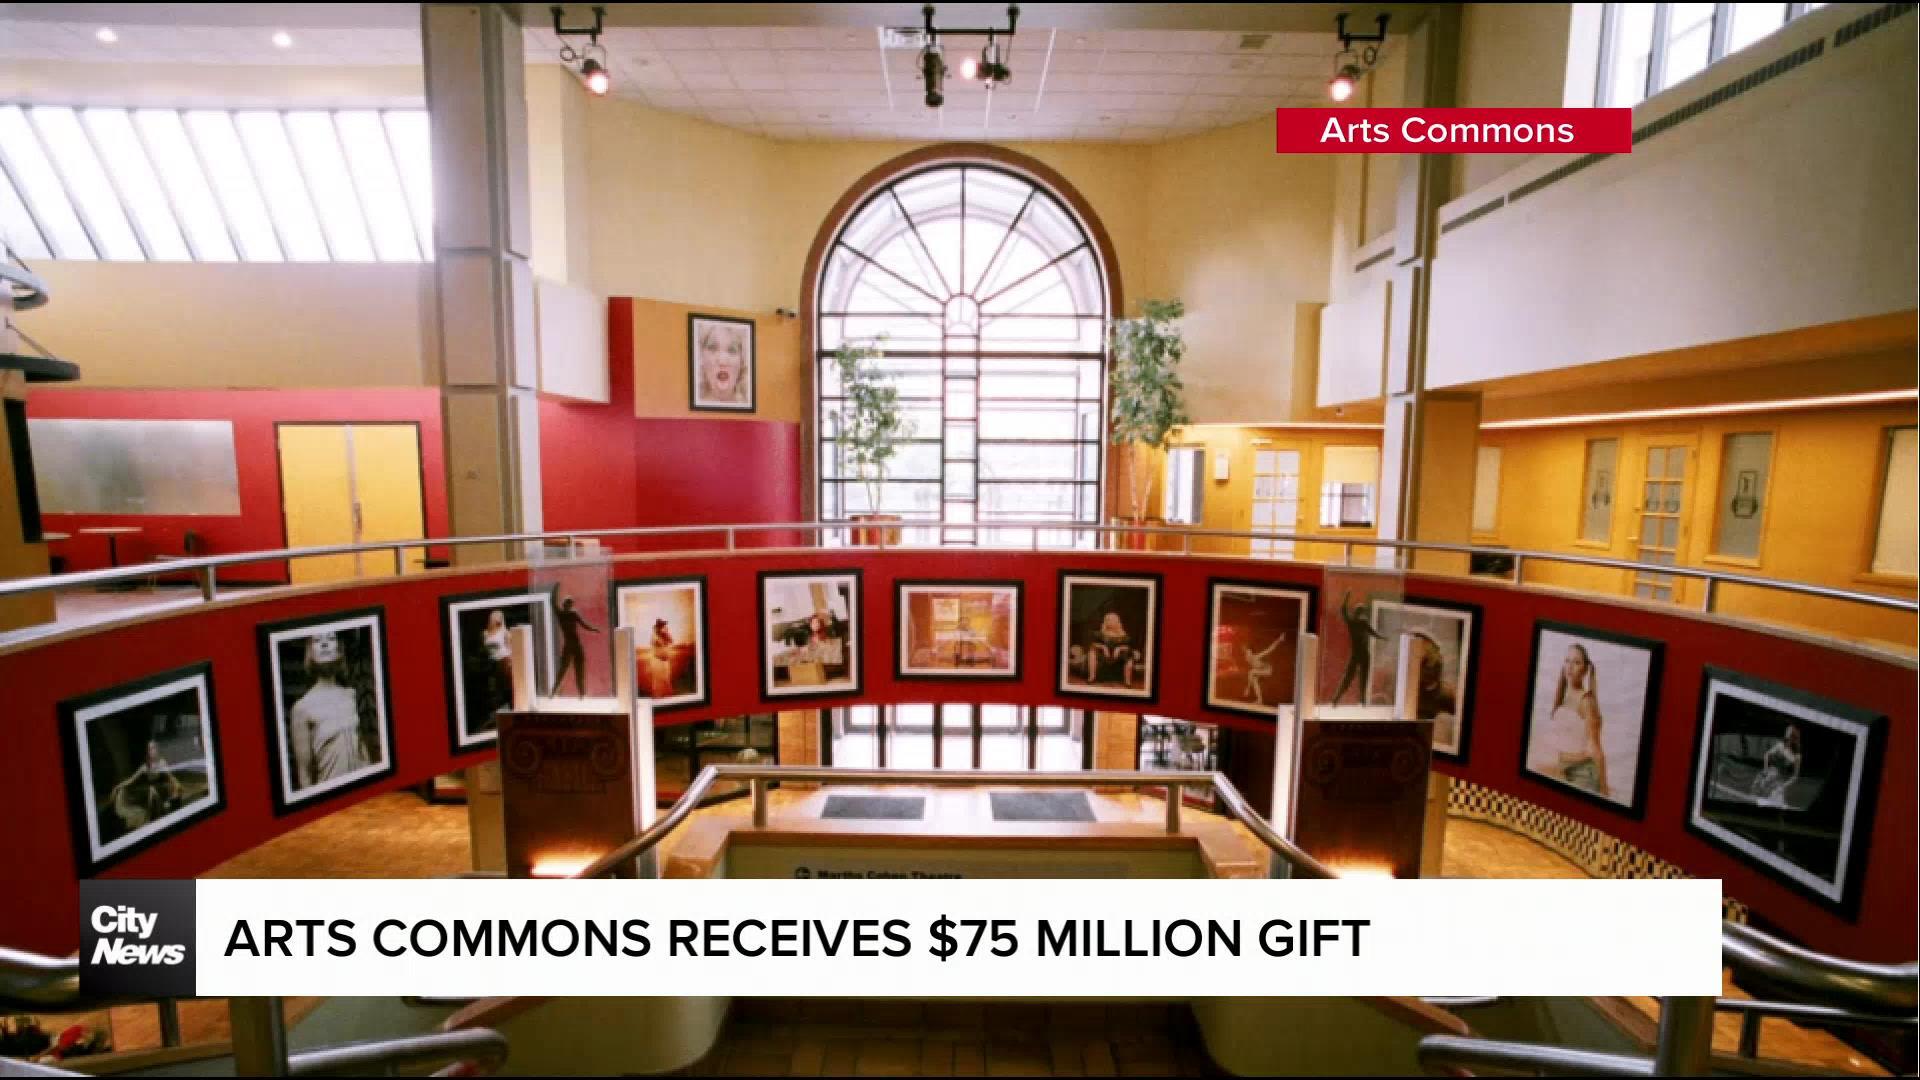 Arts Commons receives $75 million gift